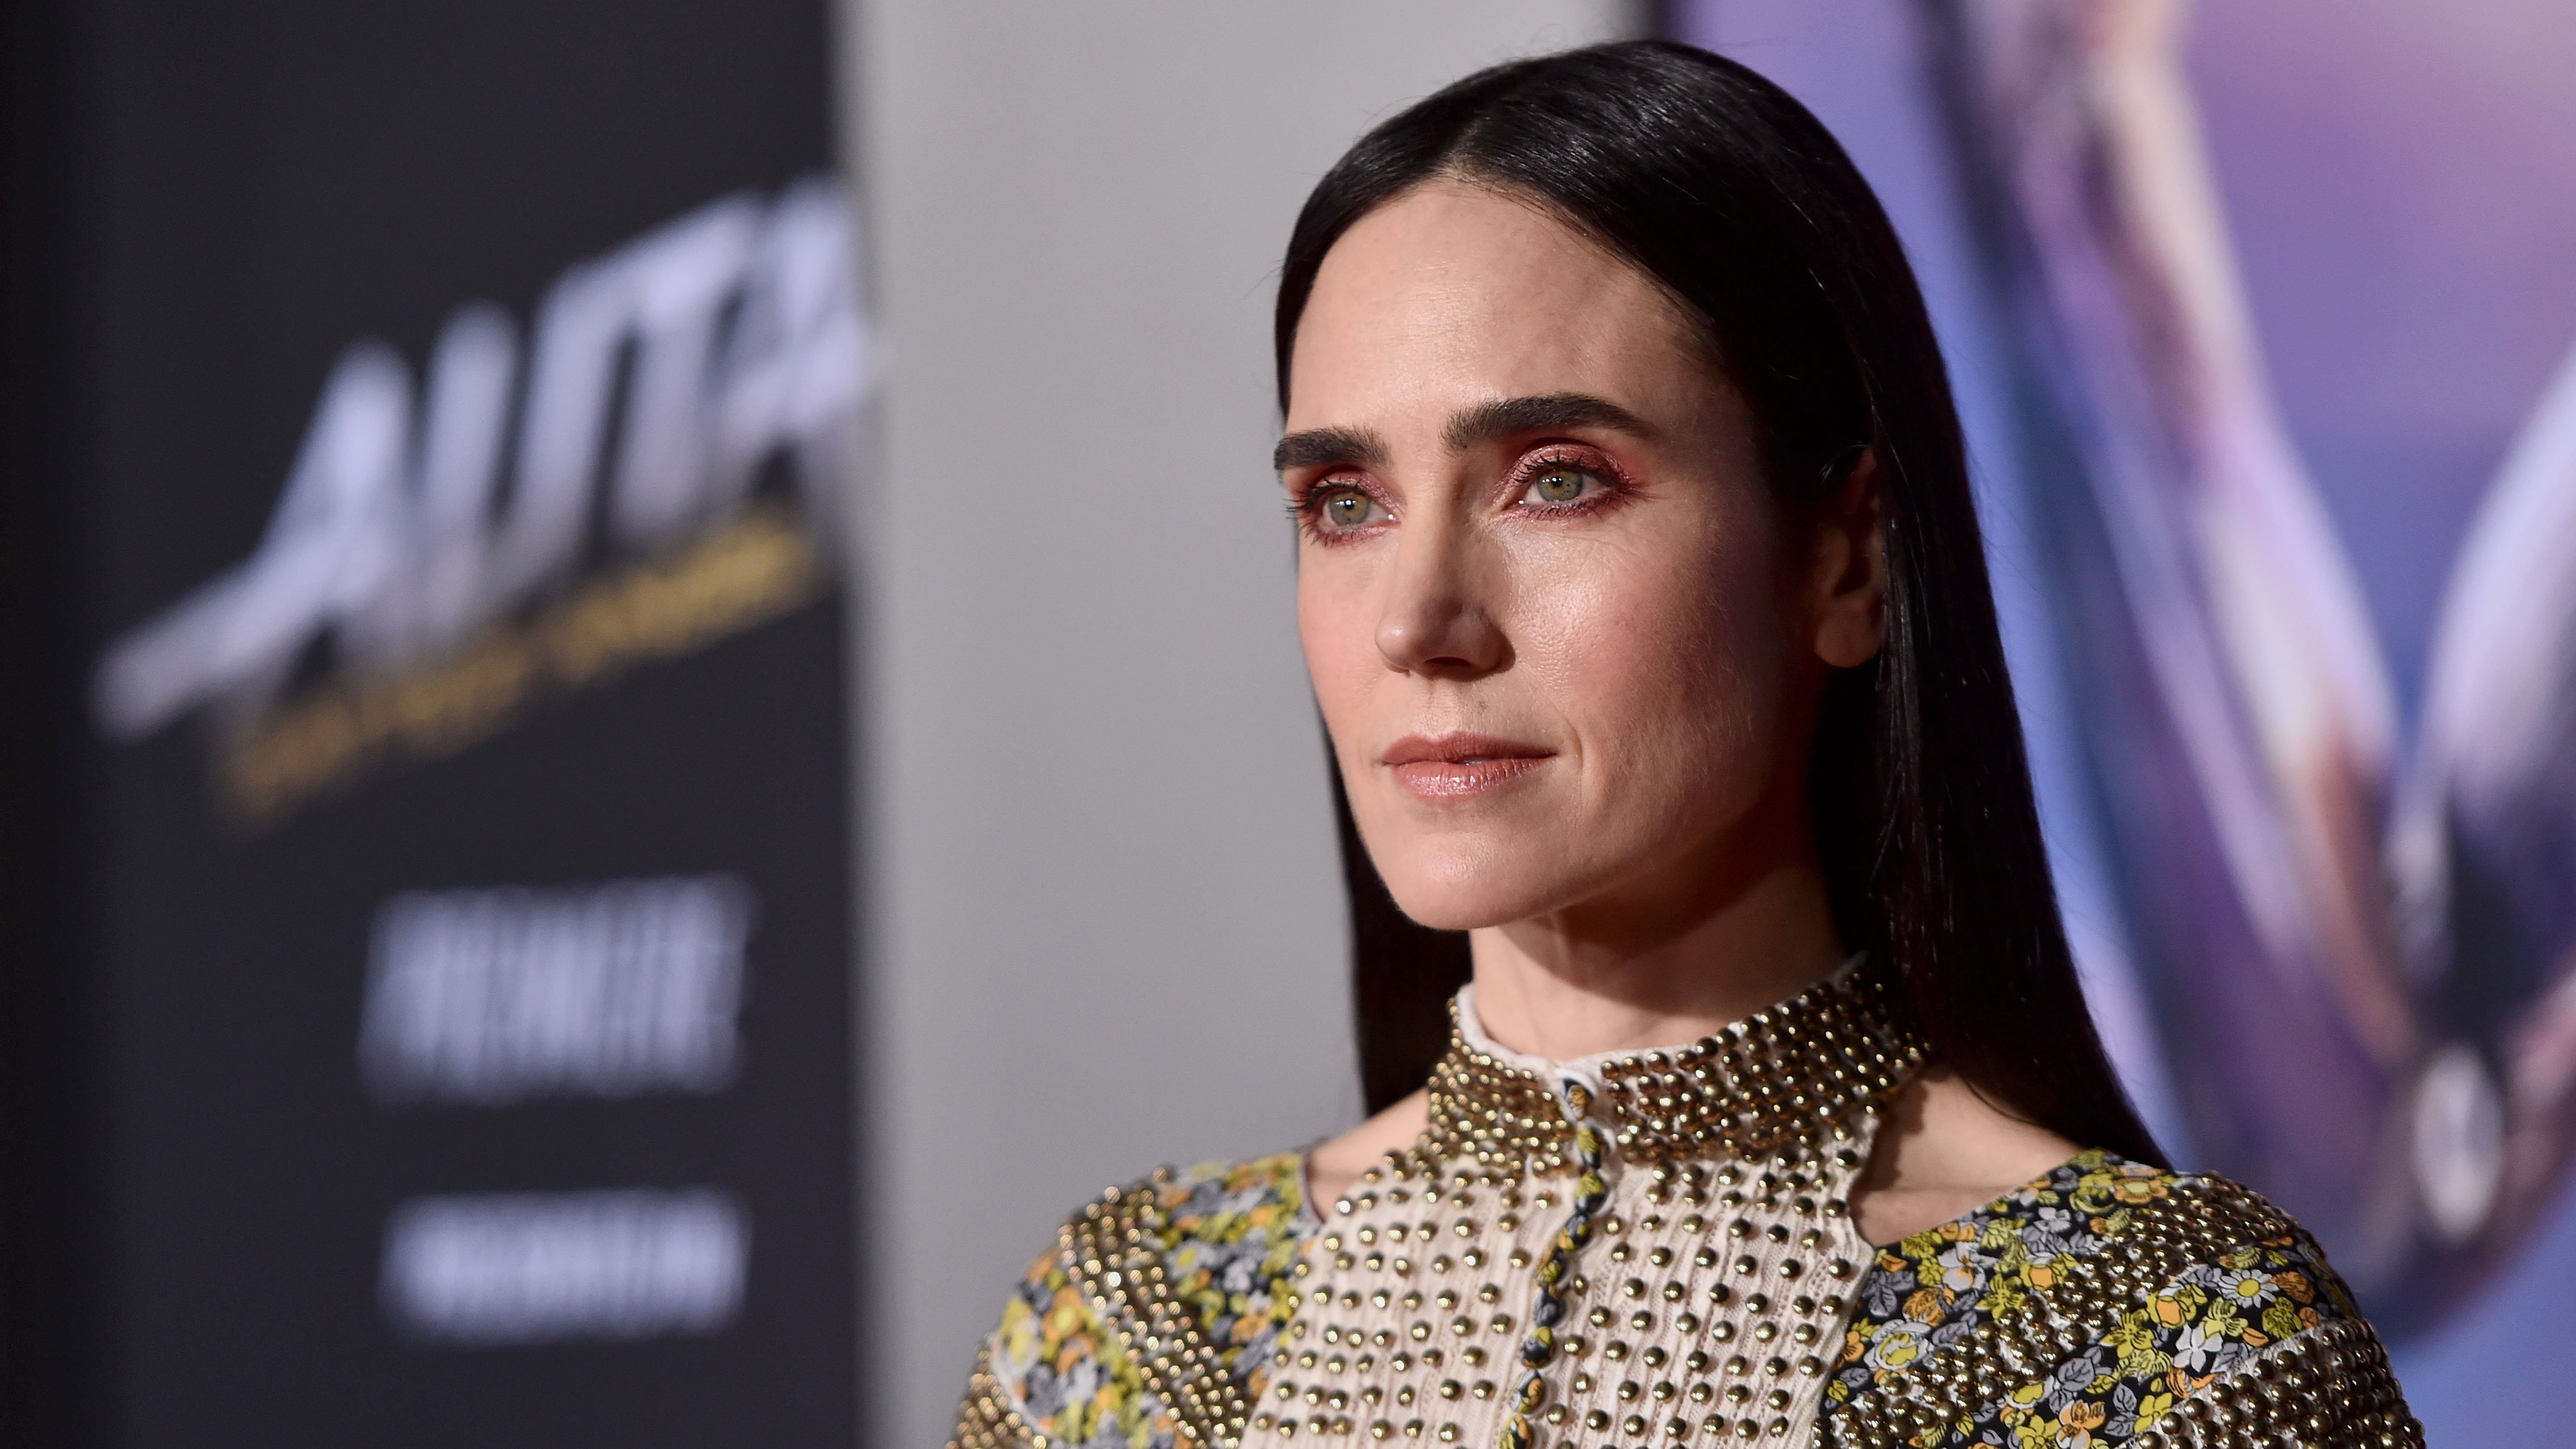 Jennifer Connelly at the premiere of 20th Century Fox's "Alita: Battle Angel" at Westwood Regency Theater in Los Angeles, California | Photo: Alberto E. Rodriguez/Getty Images